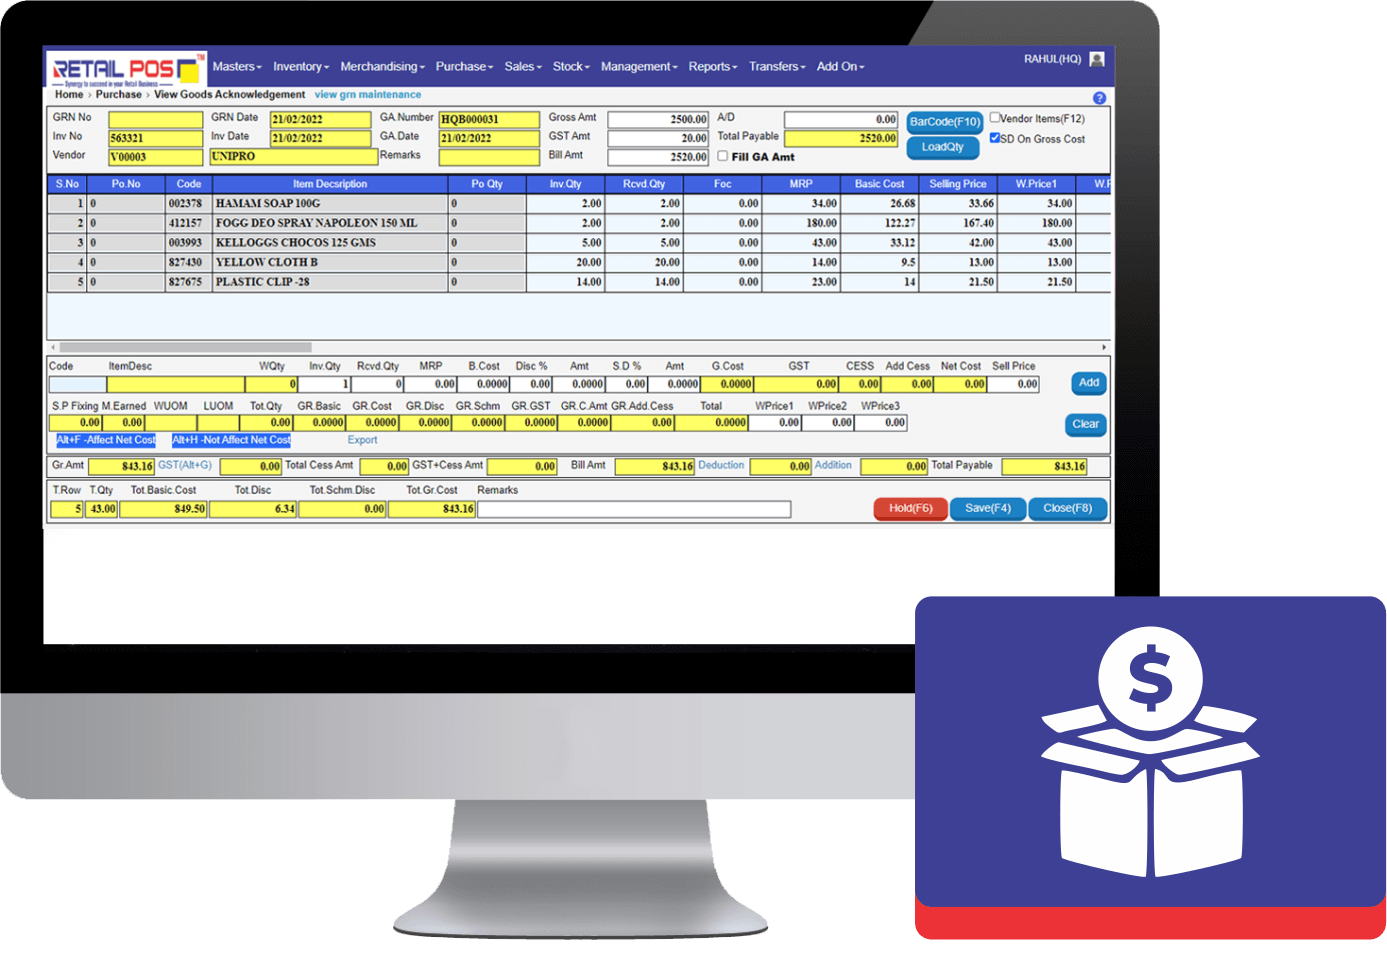 Purchase Management Screen from the Retail POS's Supermarket Billing Software